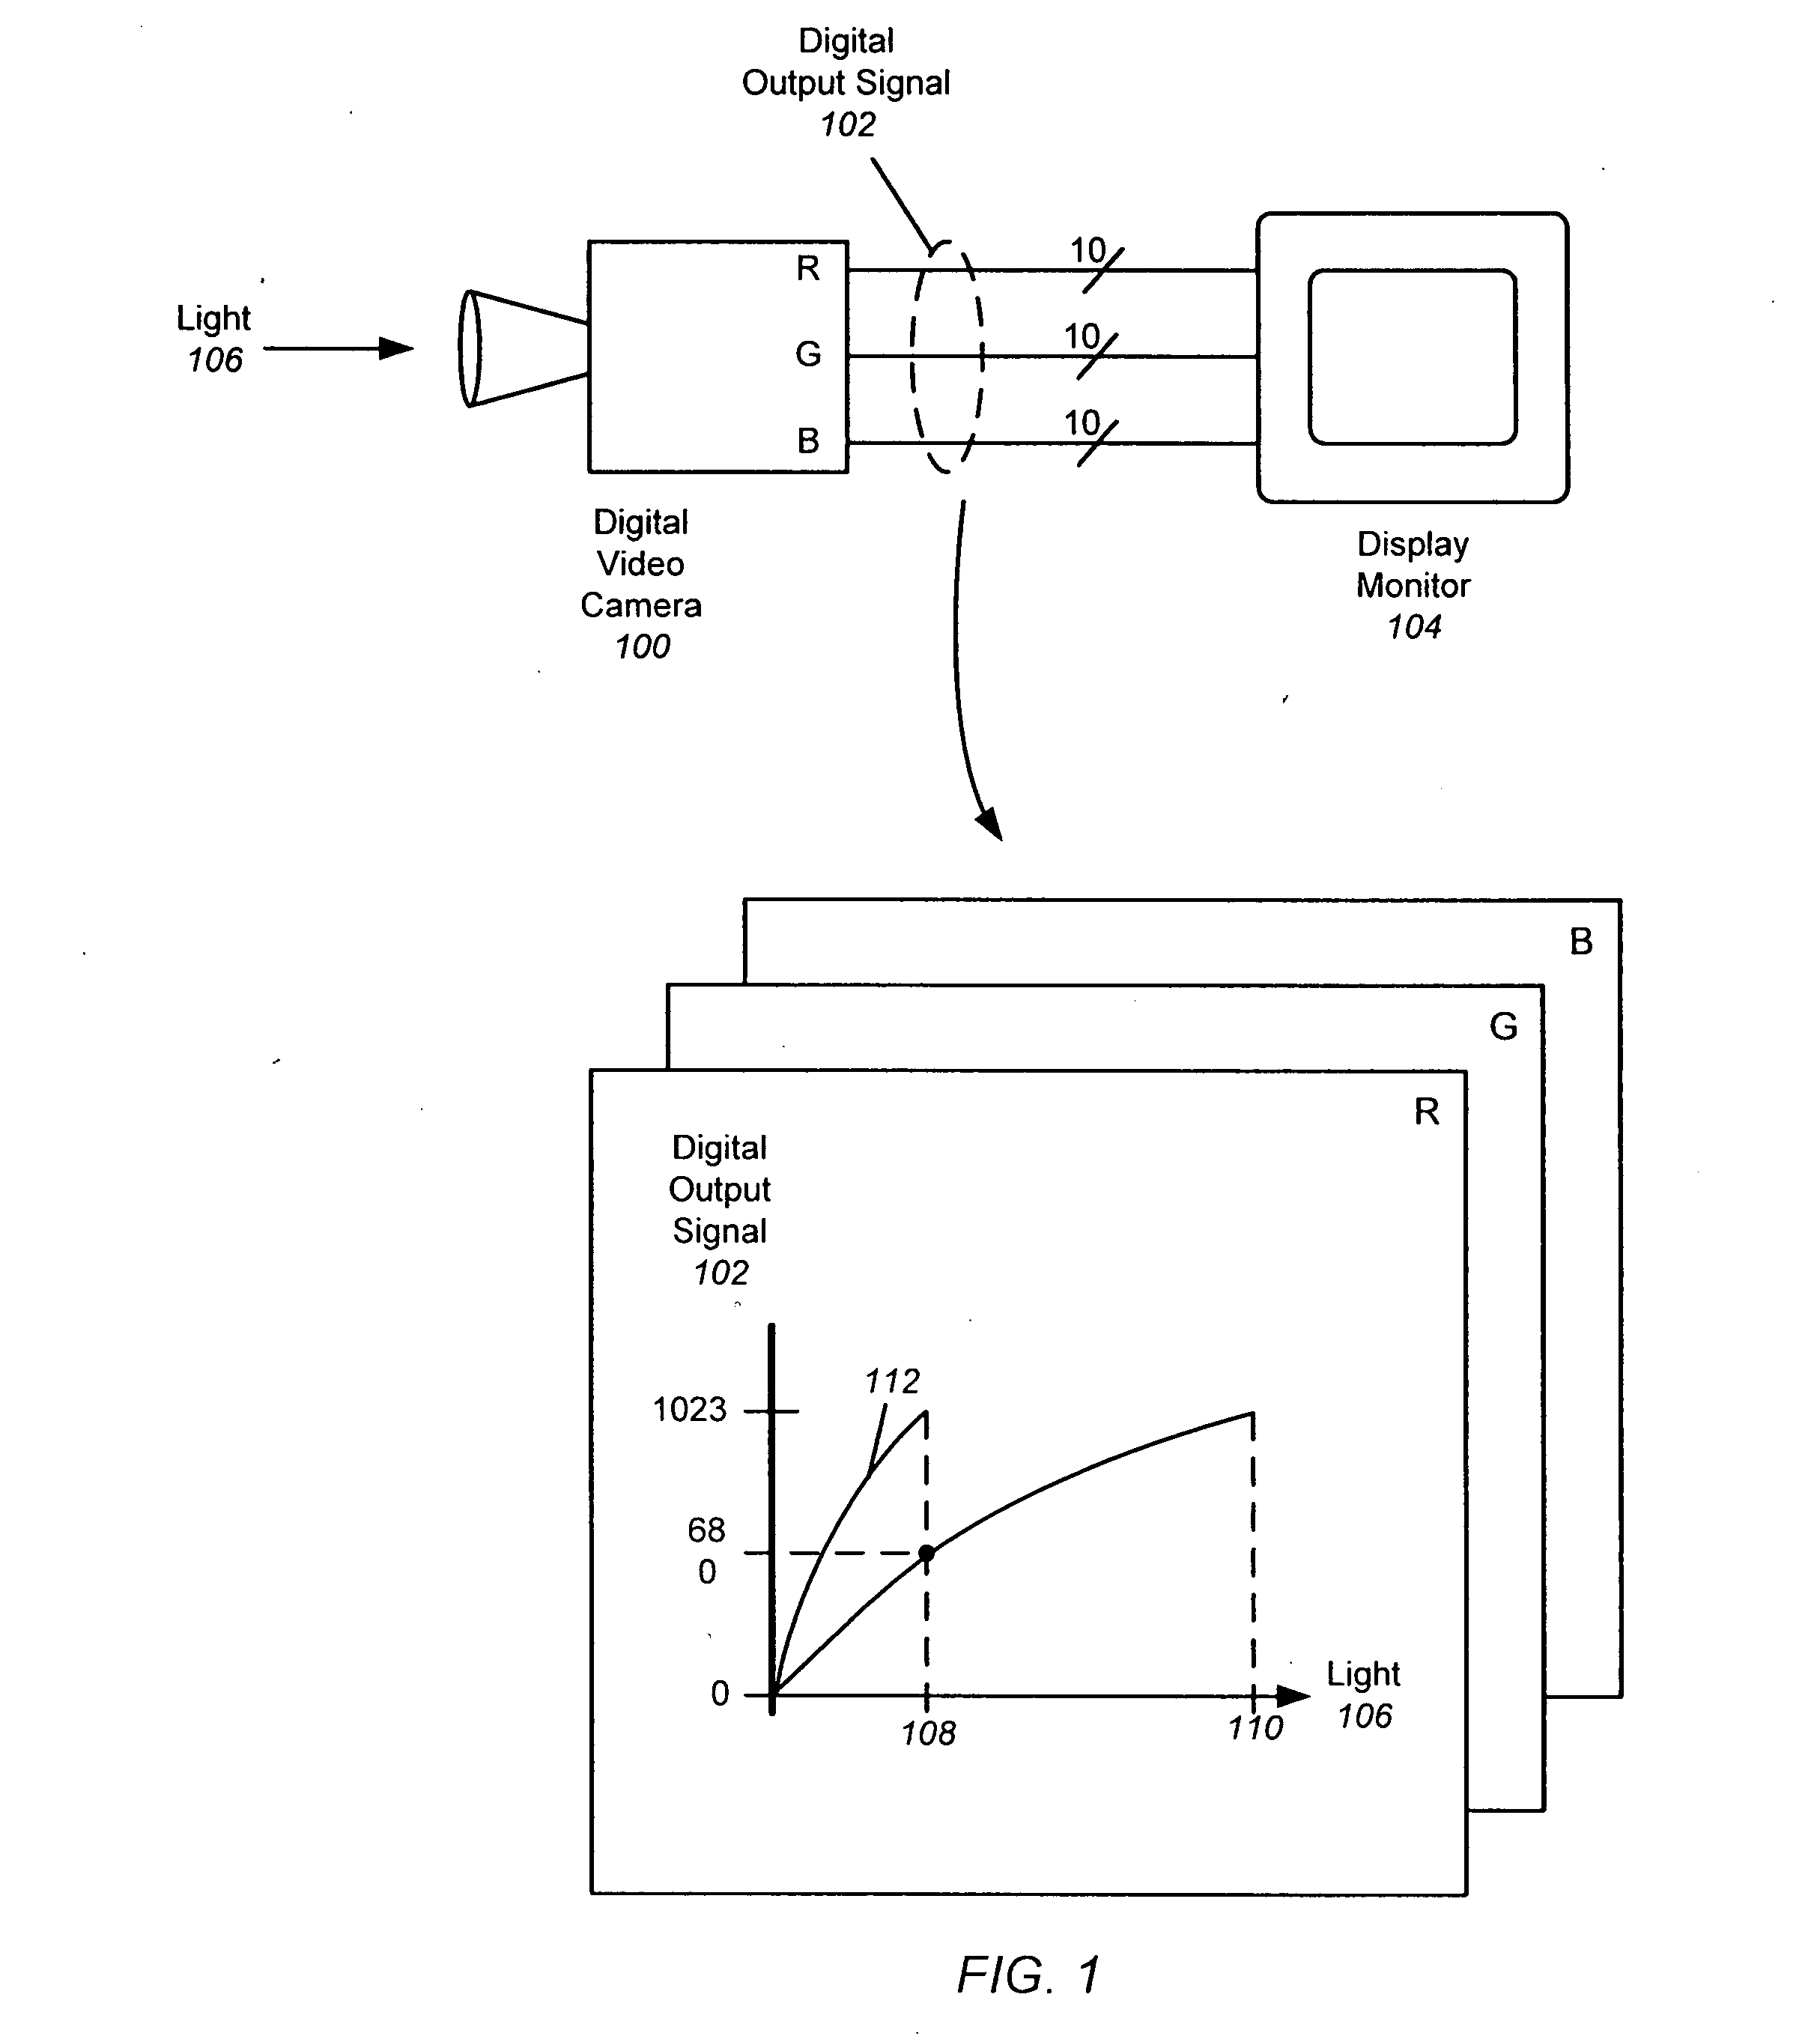 Generation of 3D look-up tables for image processing devices